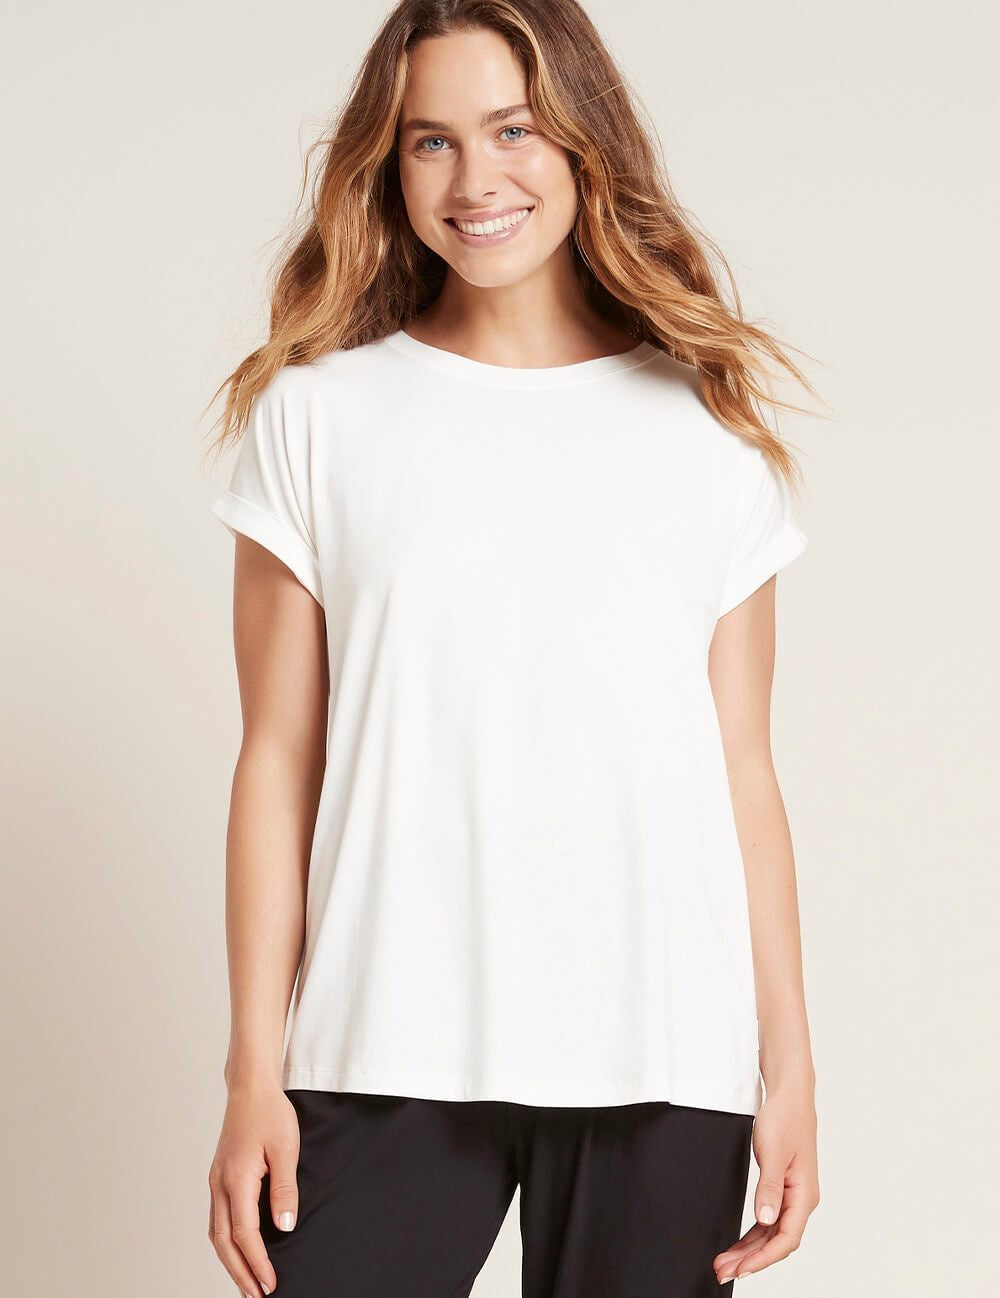 Downtime Lounge Top - White